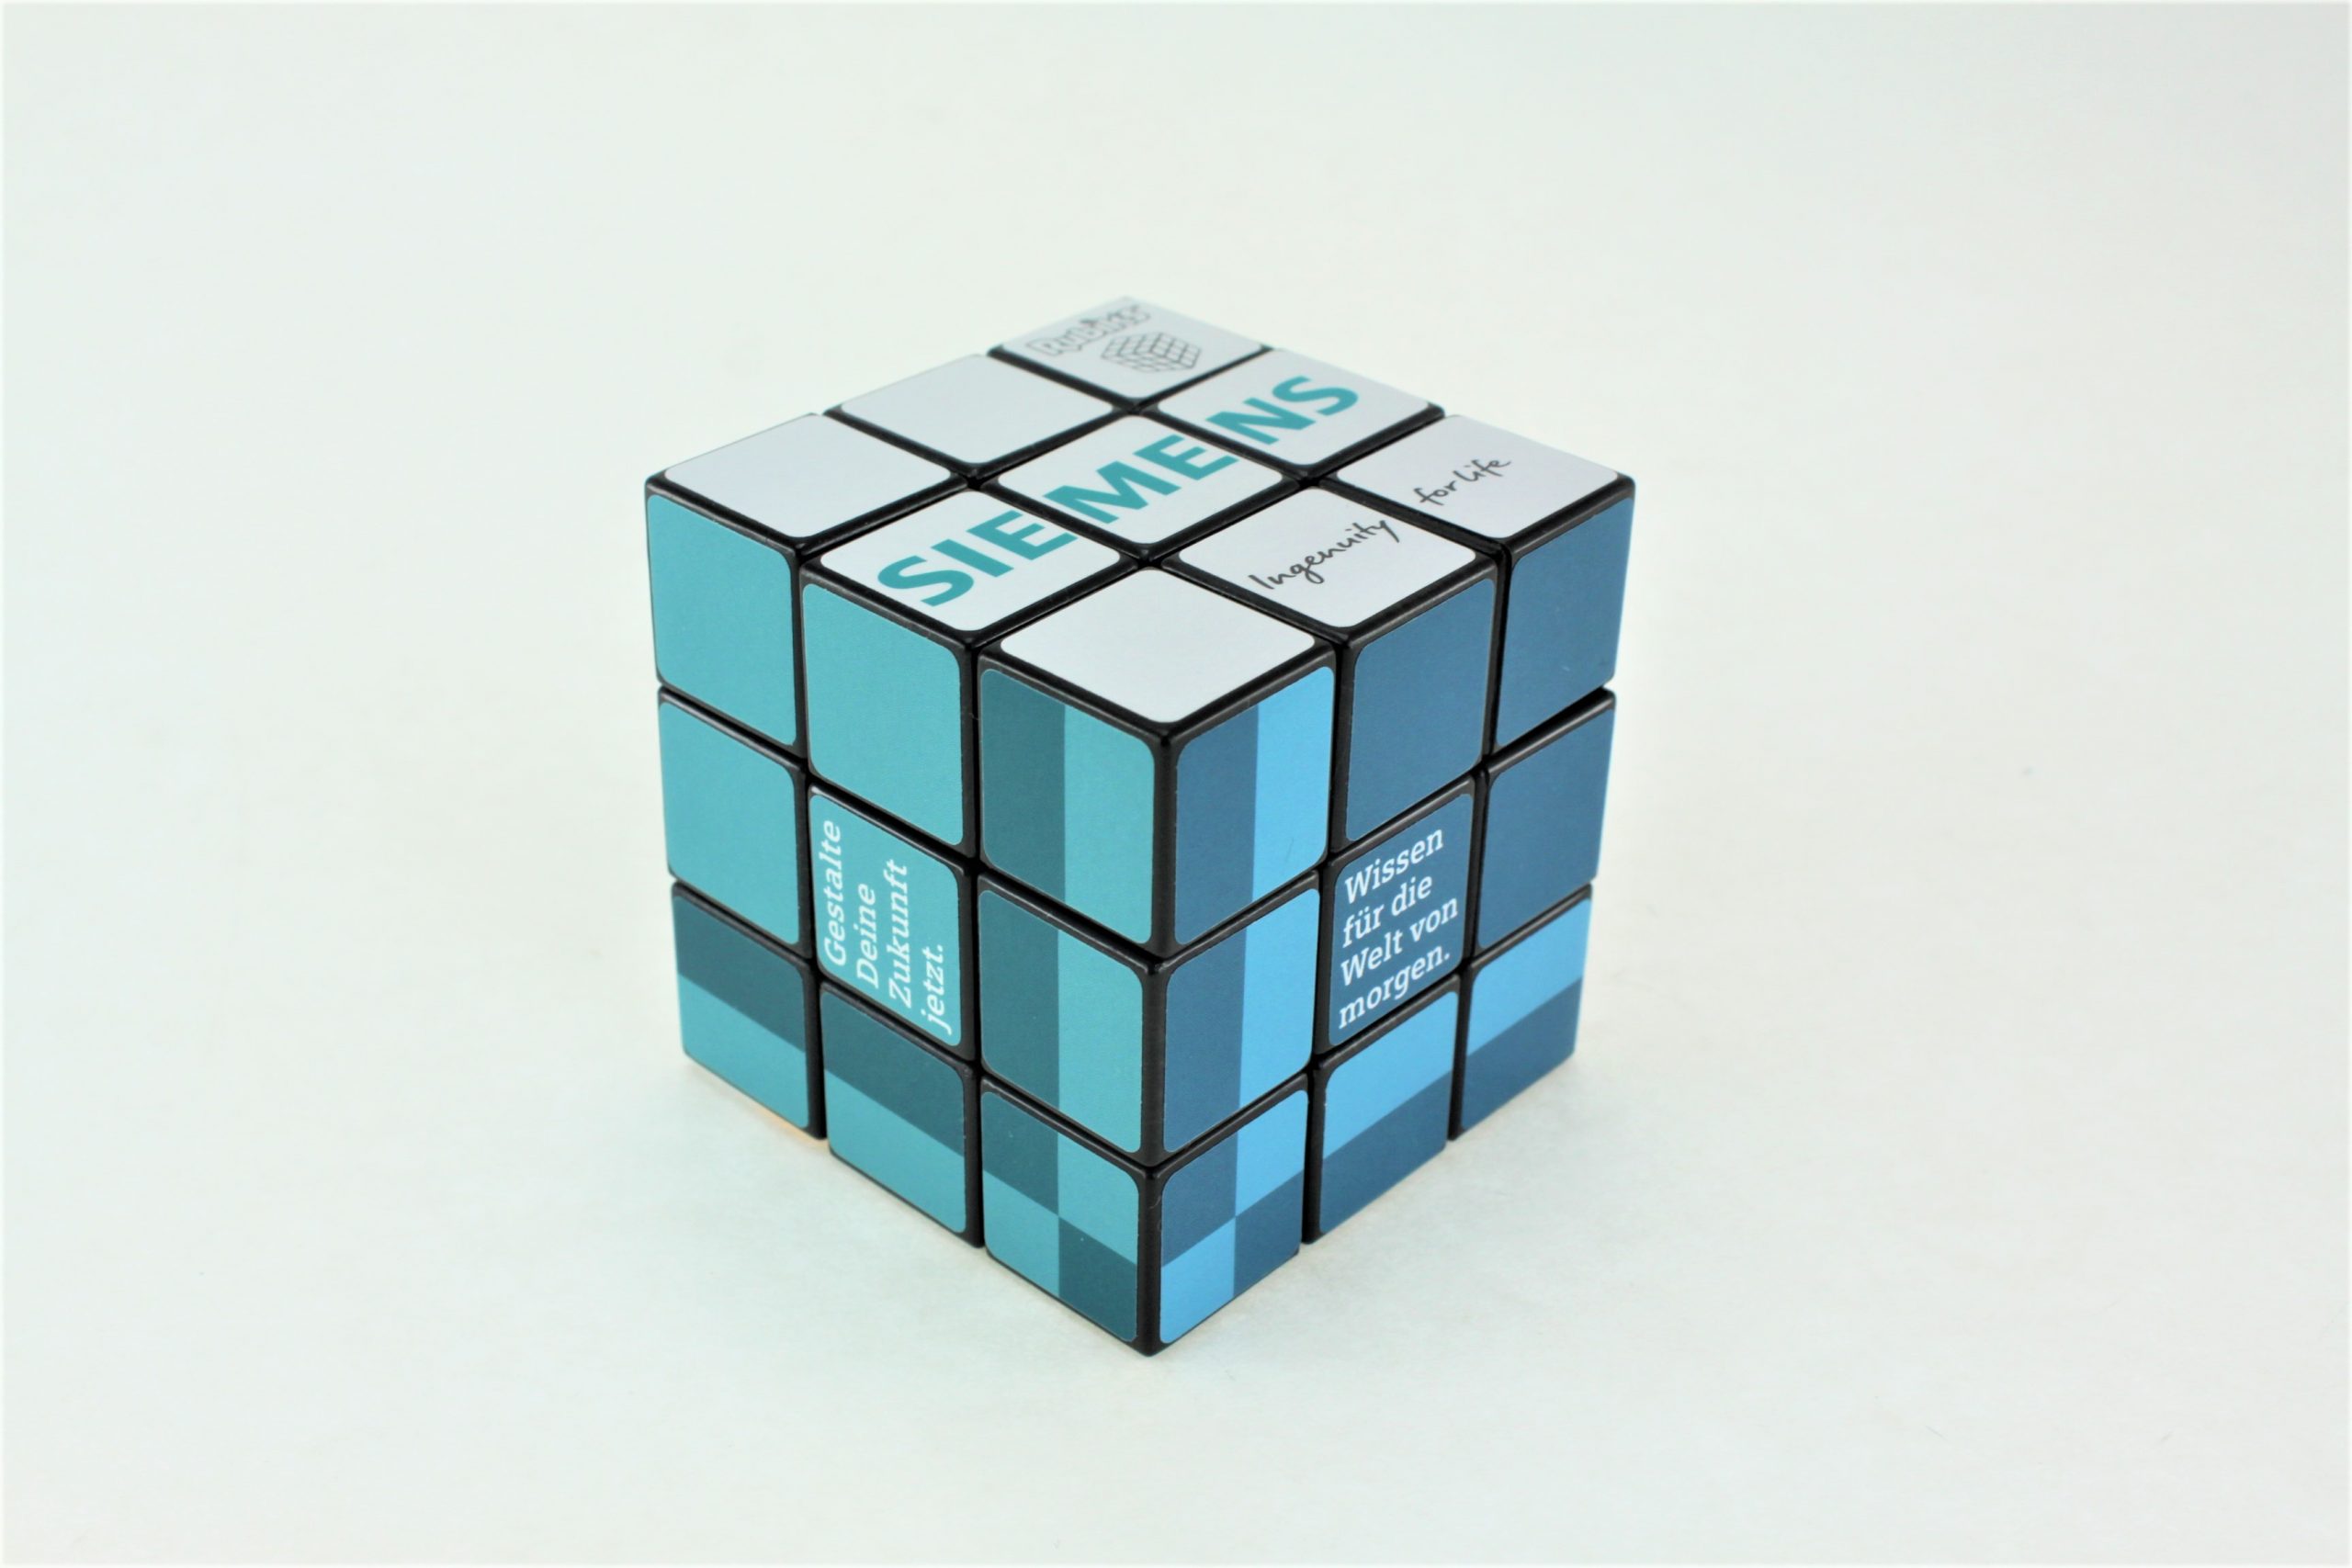 Download Siemens S Training Tool For Employees Rubik S For Brand Communication